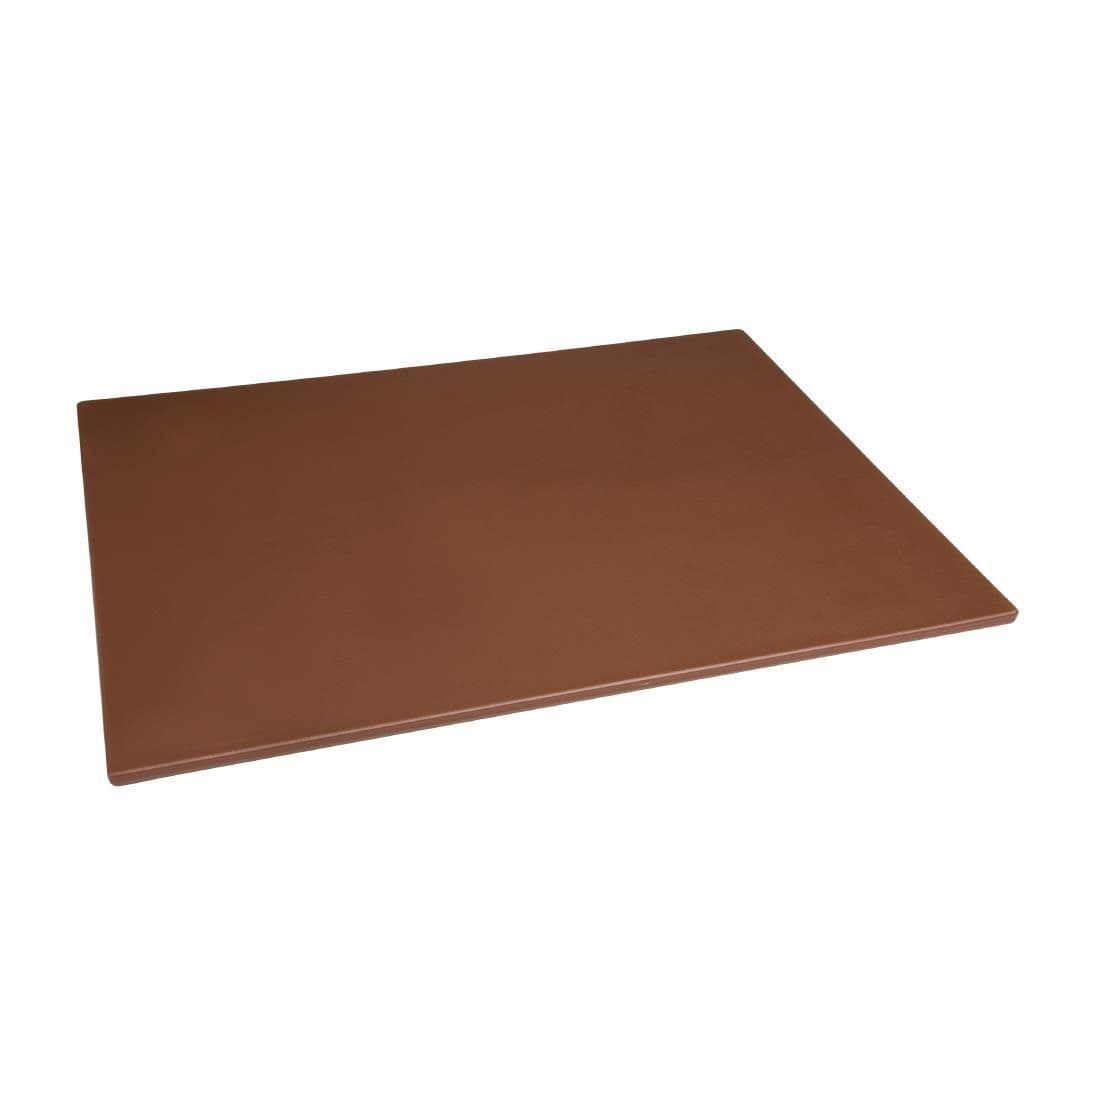 Hygiplas Low Density Brown Chopping Board Large JD Catering Equipment Solutions Ltd